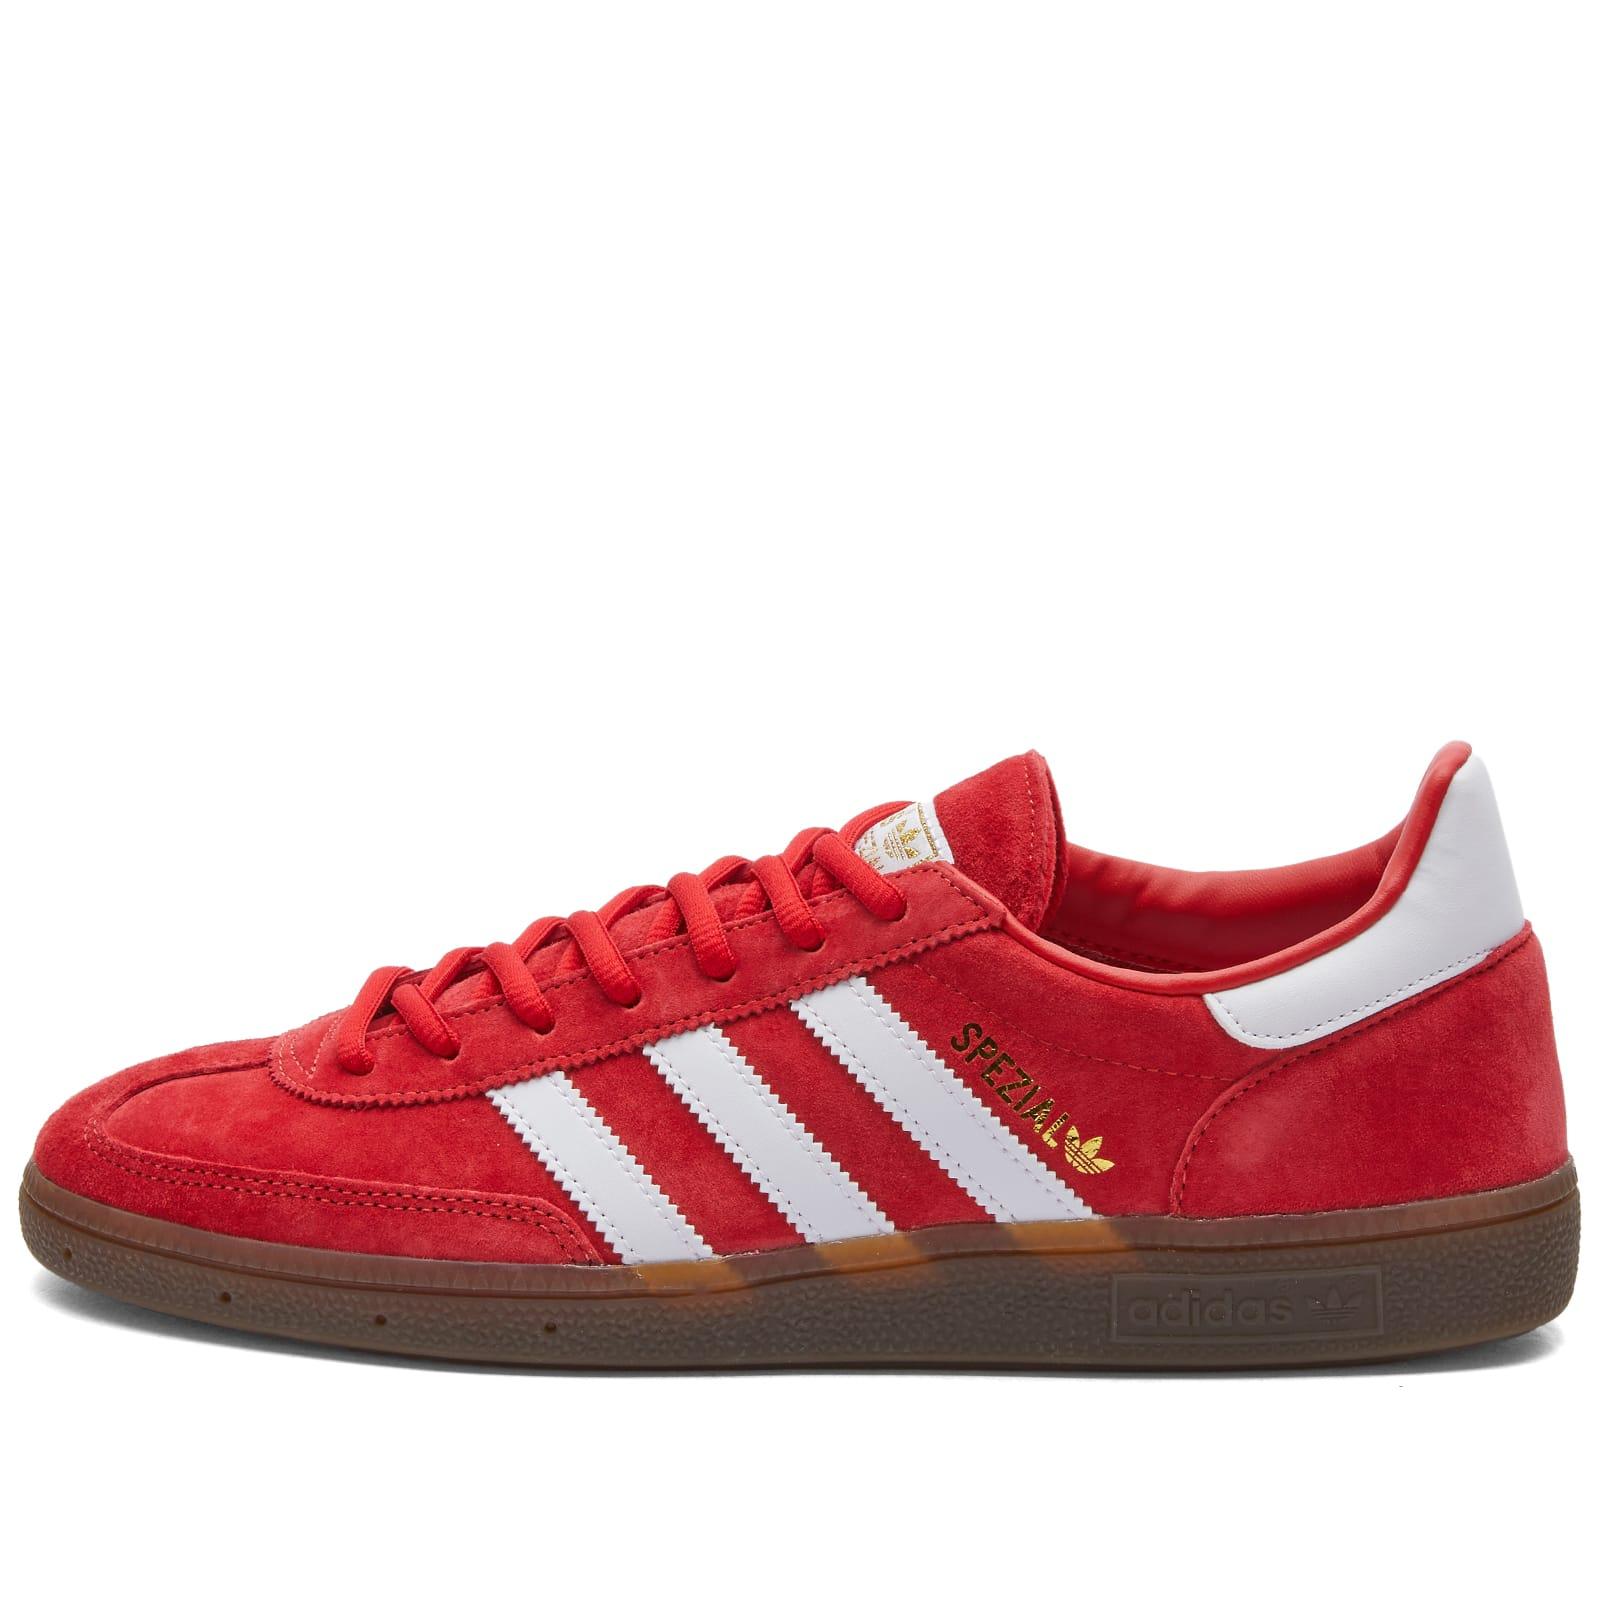 adidas Handball Spezial Sneakers in Red | Lyst